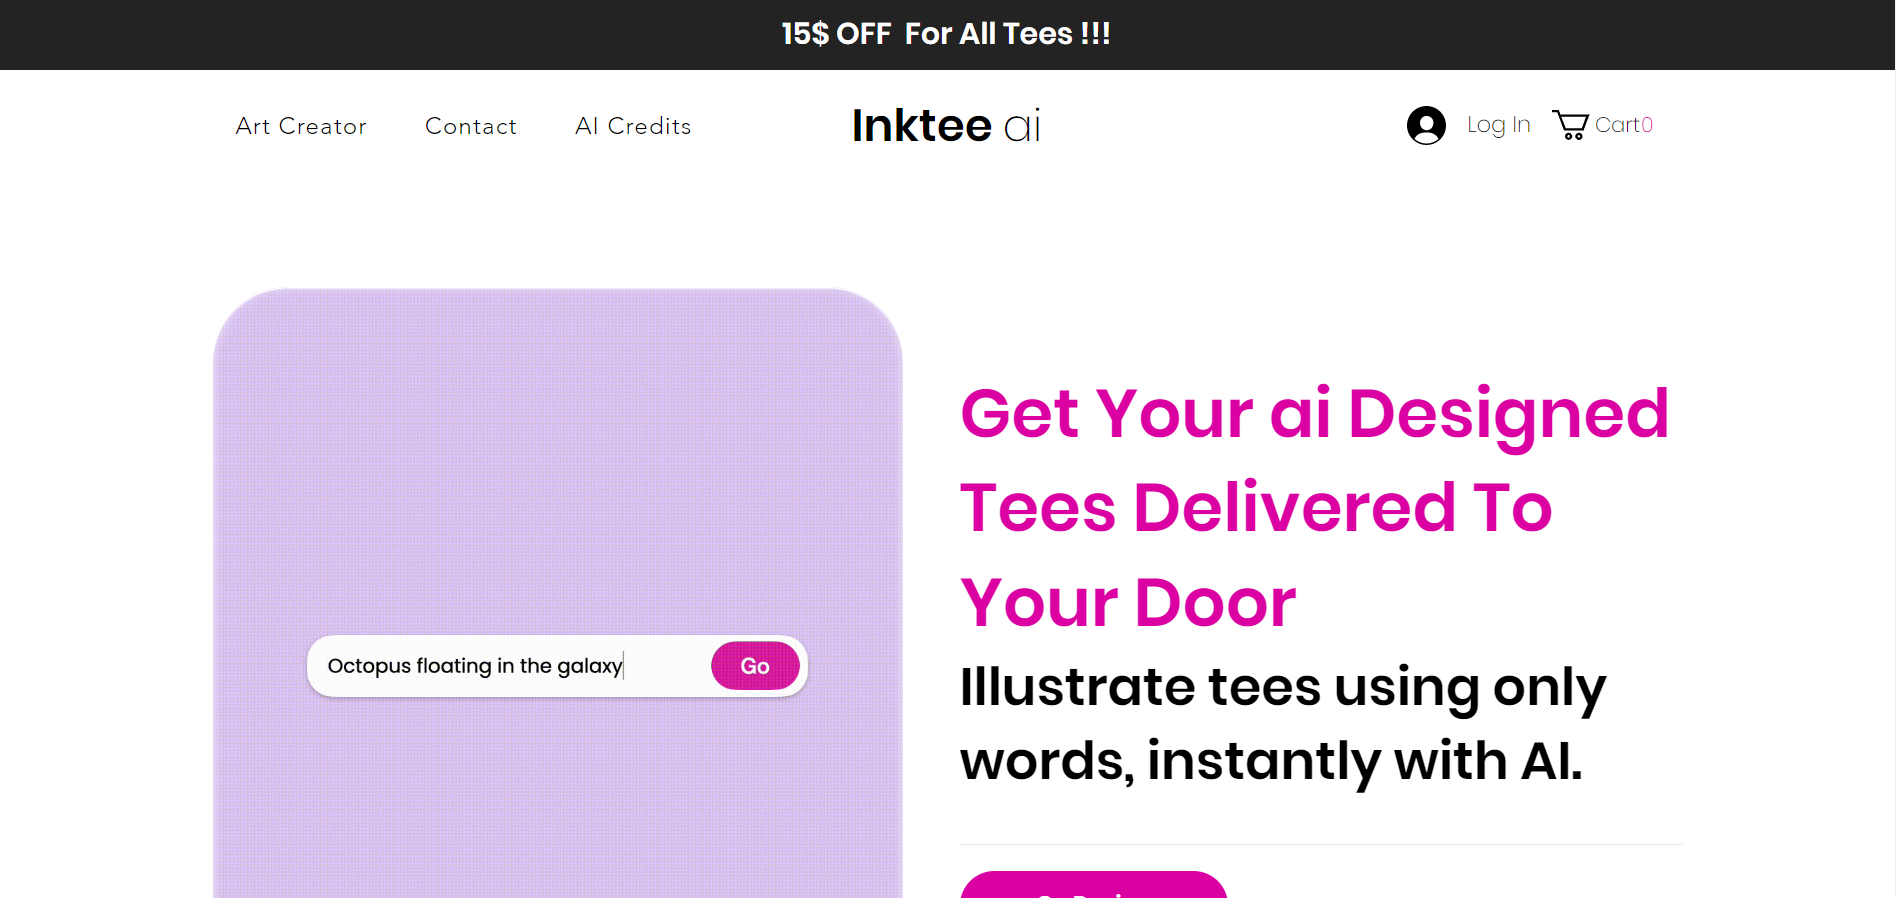 Get the Perfect T-Shirt Design with Inkteeai.com’s Custom AI Technology!